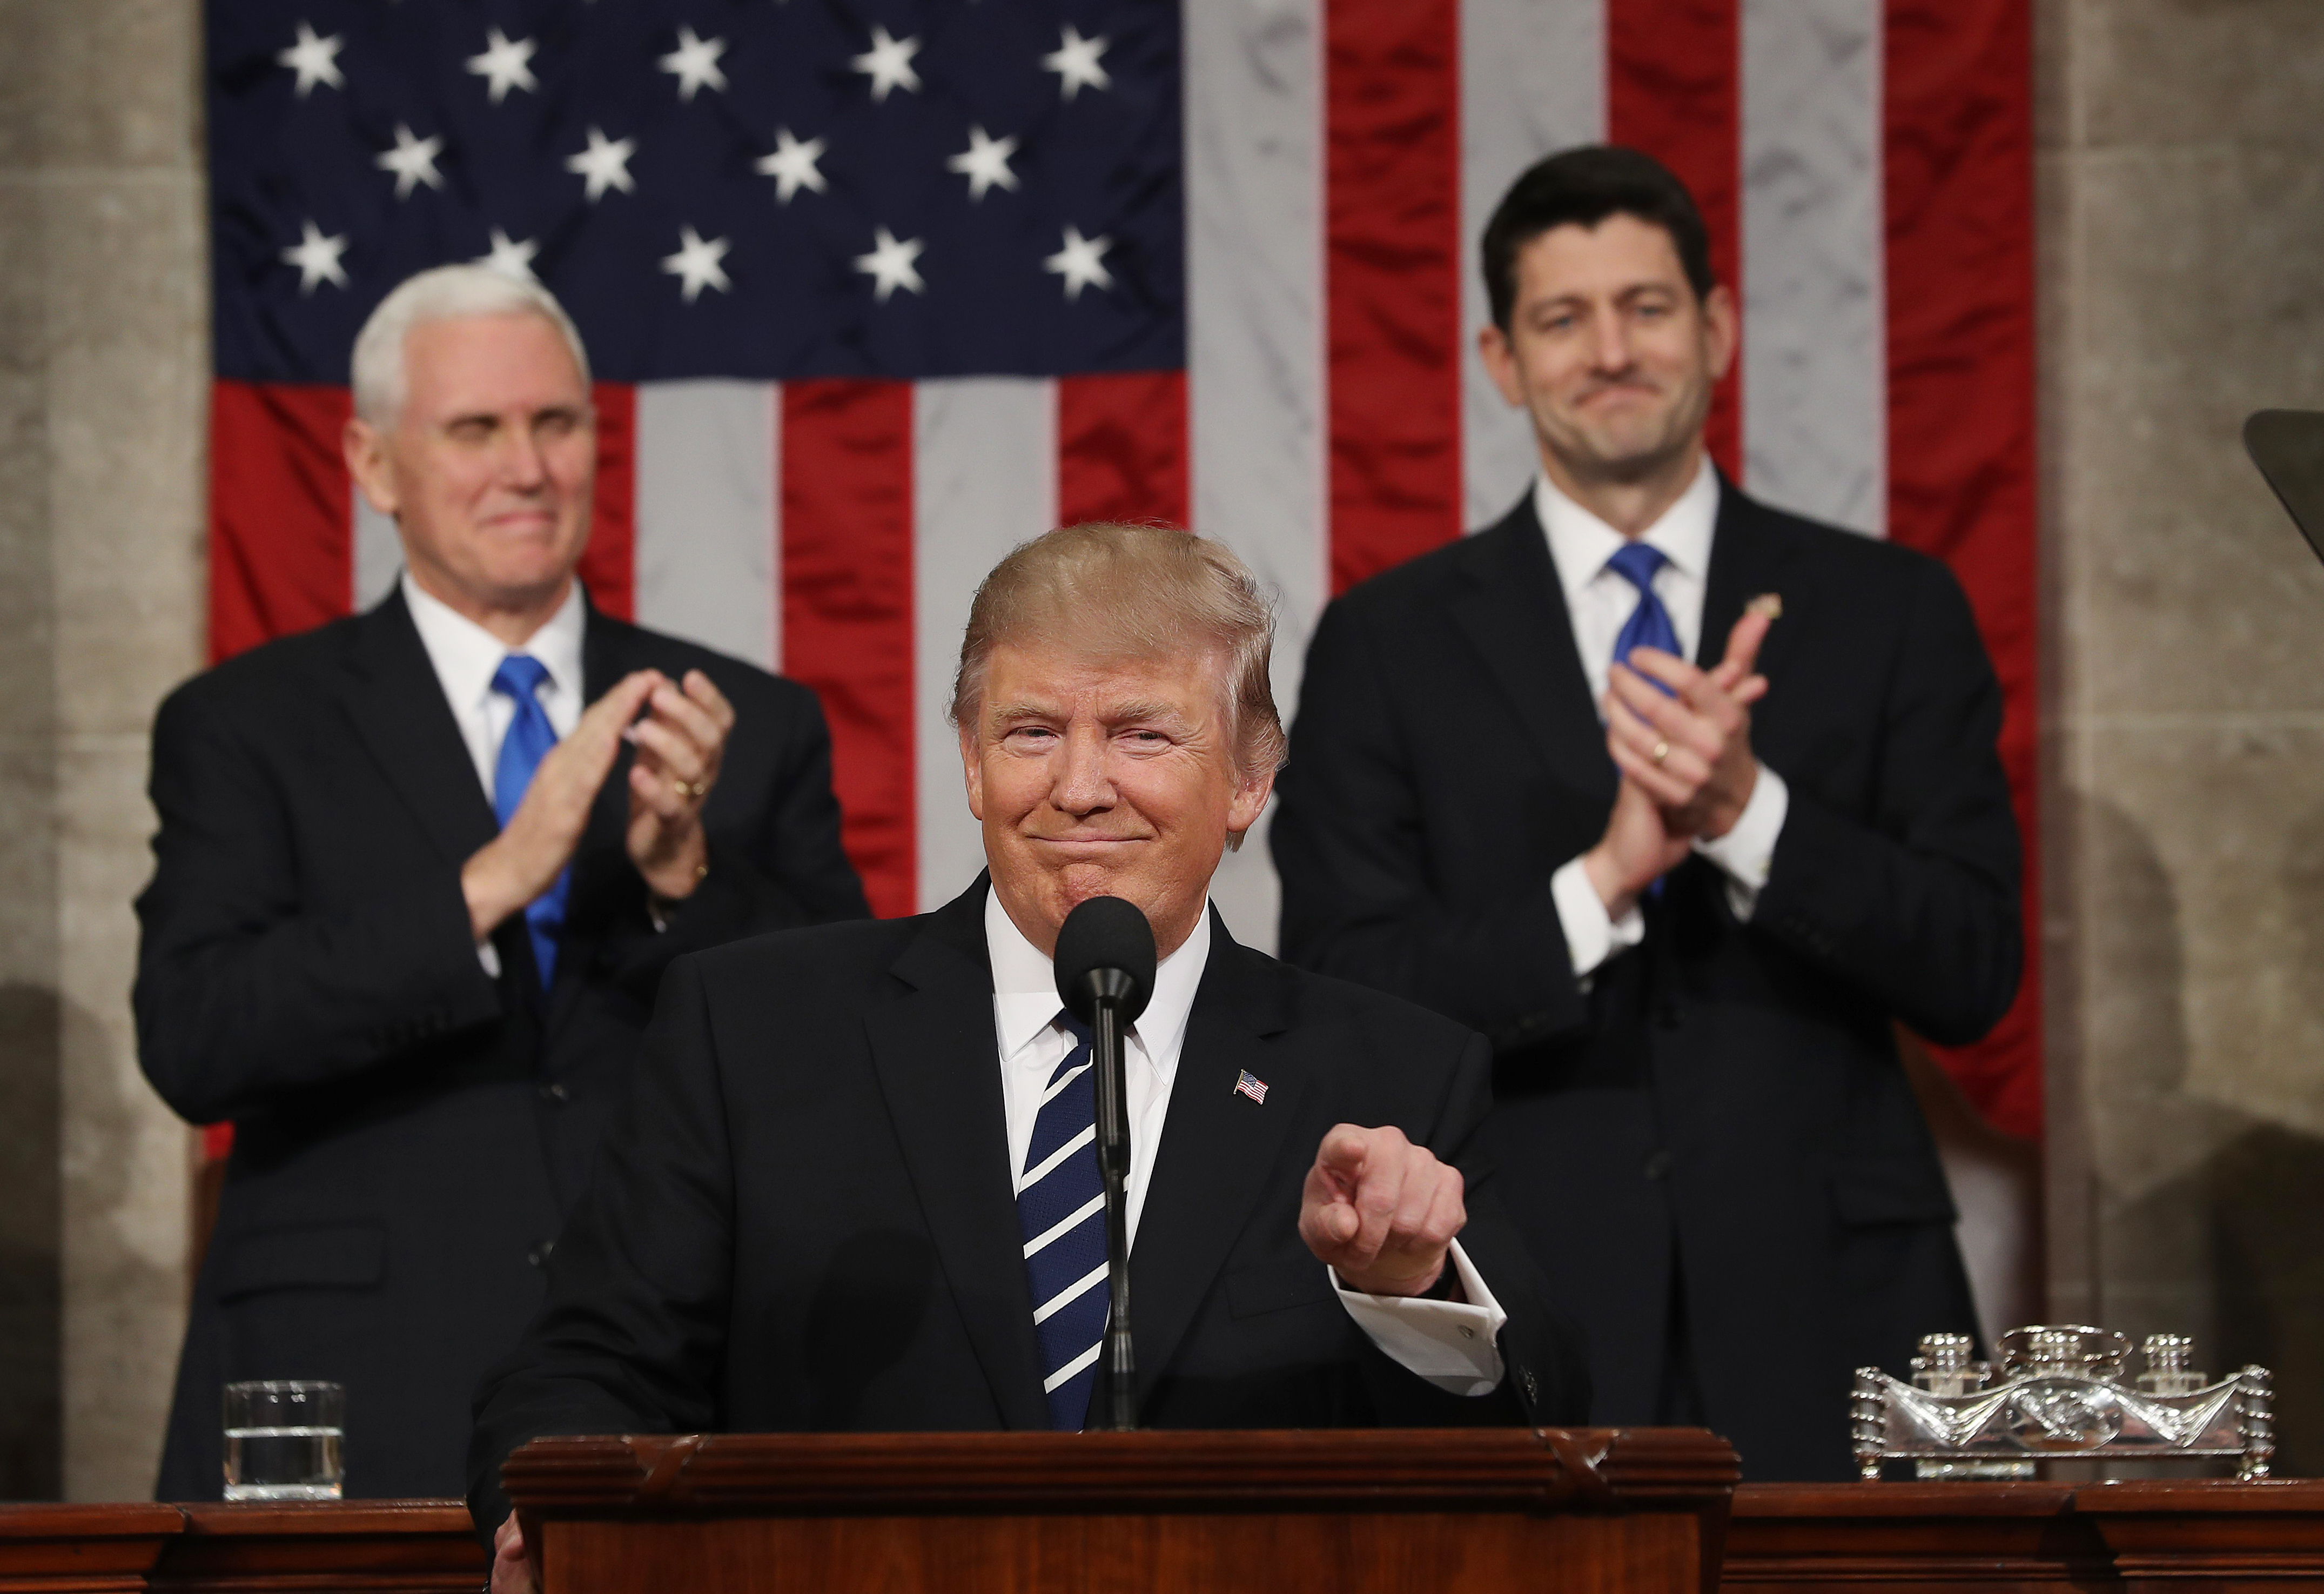 President Trump delivers an address to Congress in January 2017.